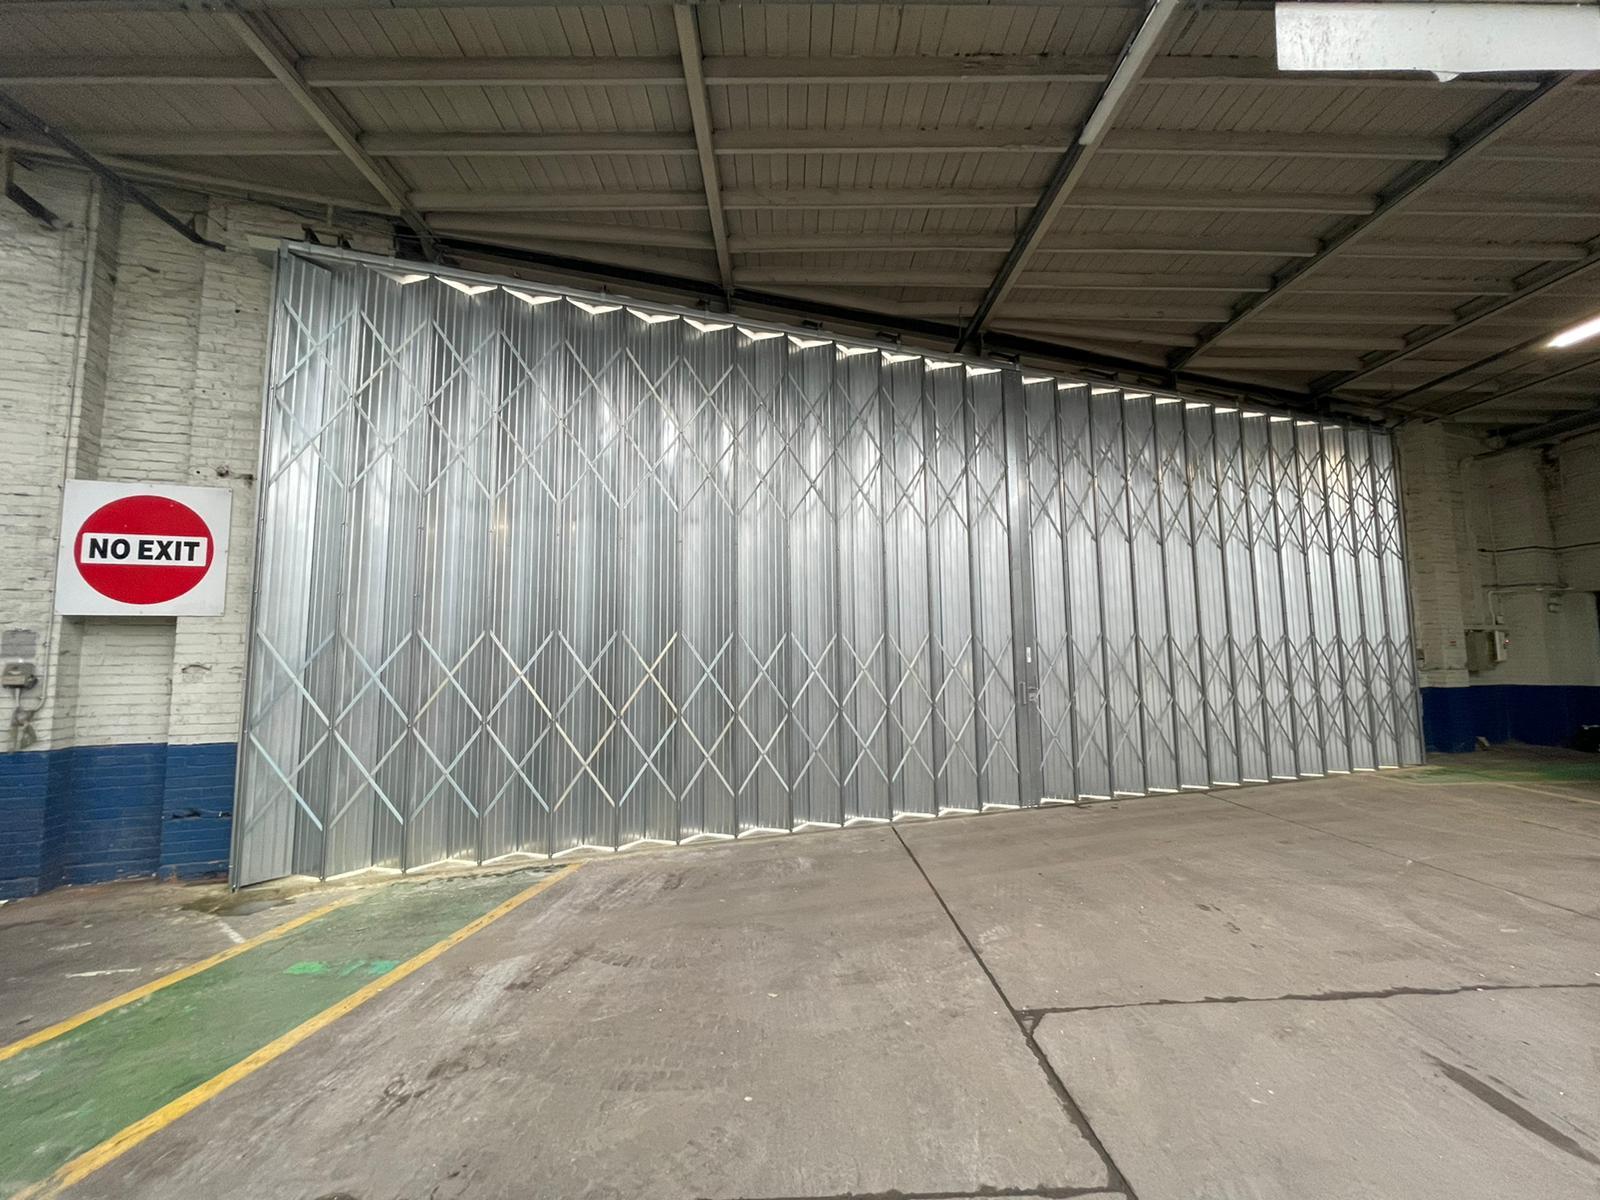 The inside of the sliding folding door at the Stagecoach site in Northampton